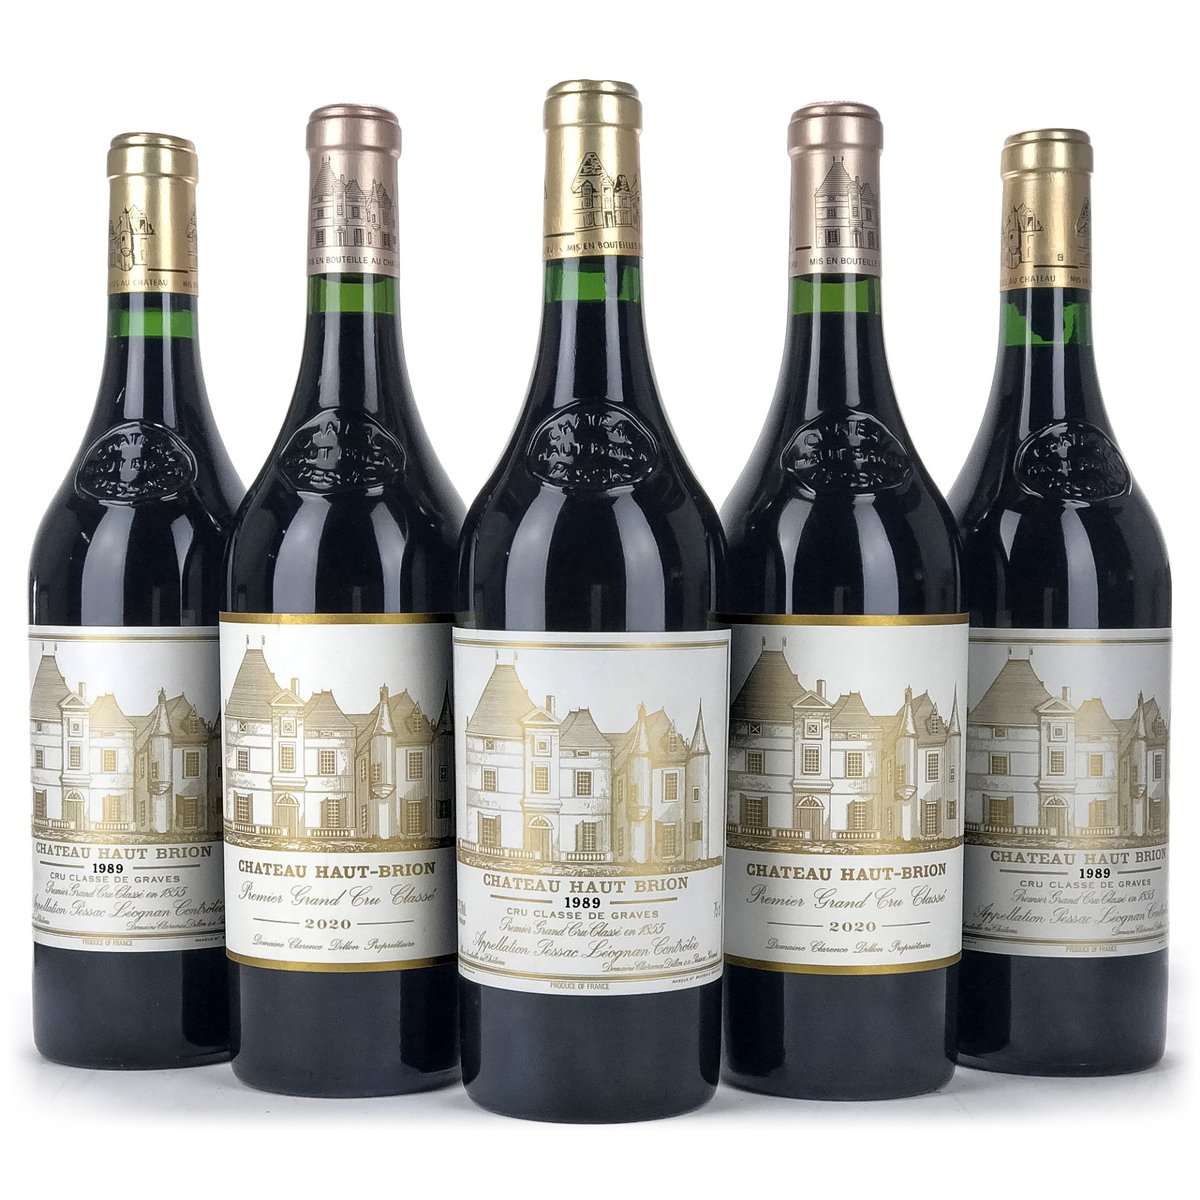 Haut-Brion: Explore a collection of perfect 100-point vintages and own a piece of Bordeaux history now at 7% Off.

👉Shop Now by clicking the link below:
hubs.li/Q02p-bVx0

#HautBrion #Bordeaux #PessacLeognan #100pointwine #FirstGrowth #WinePassion #WineoClock #WineTime